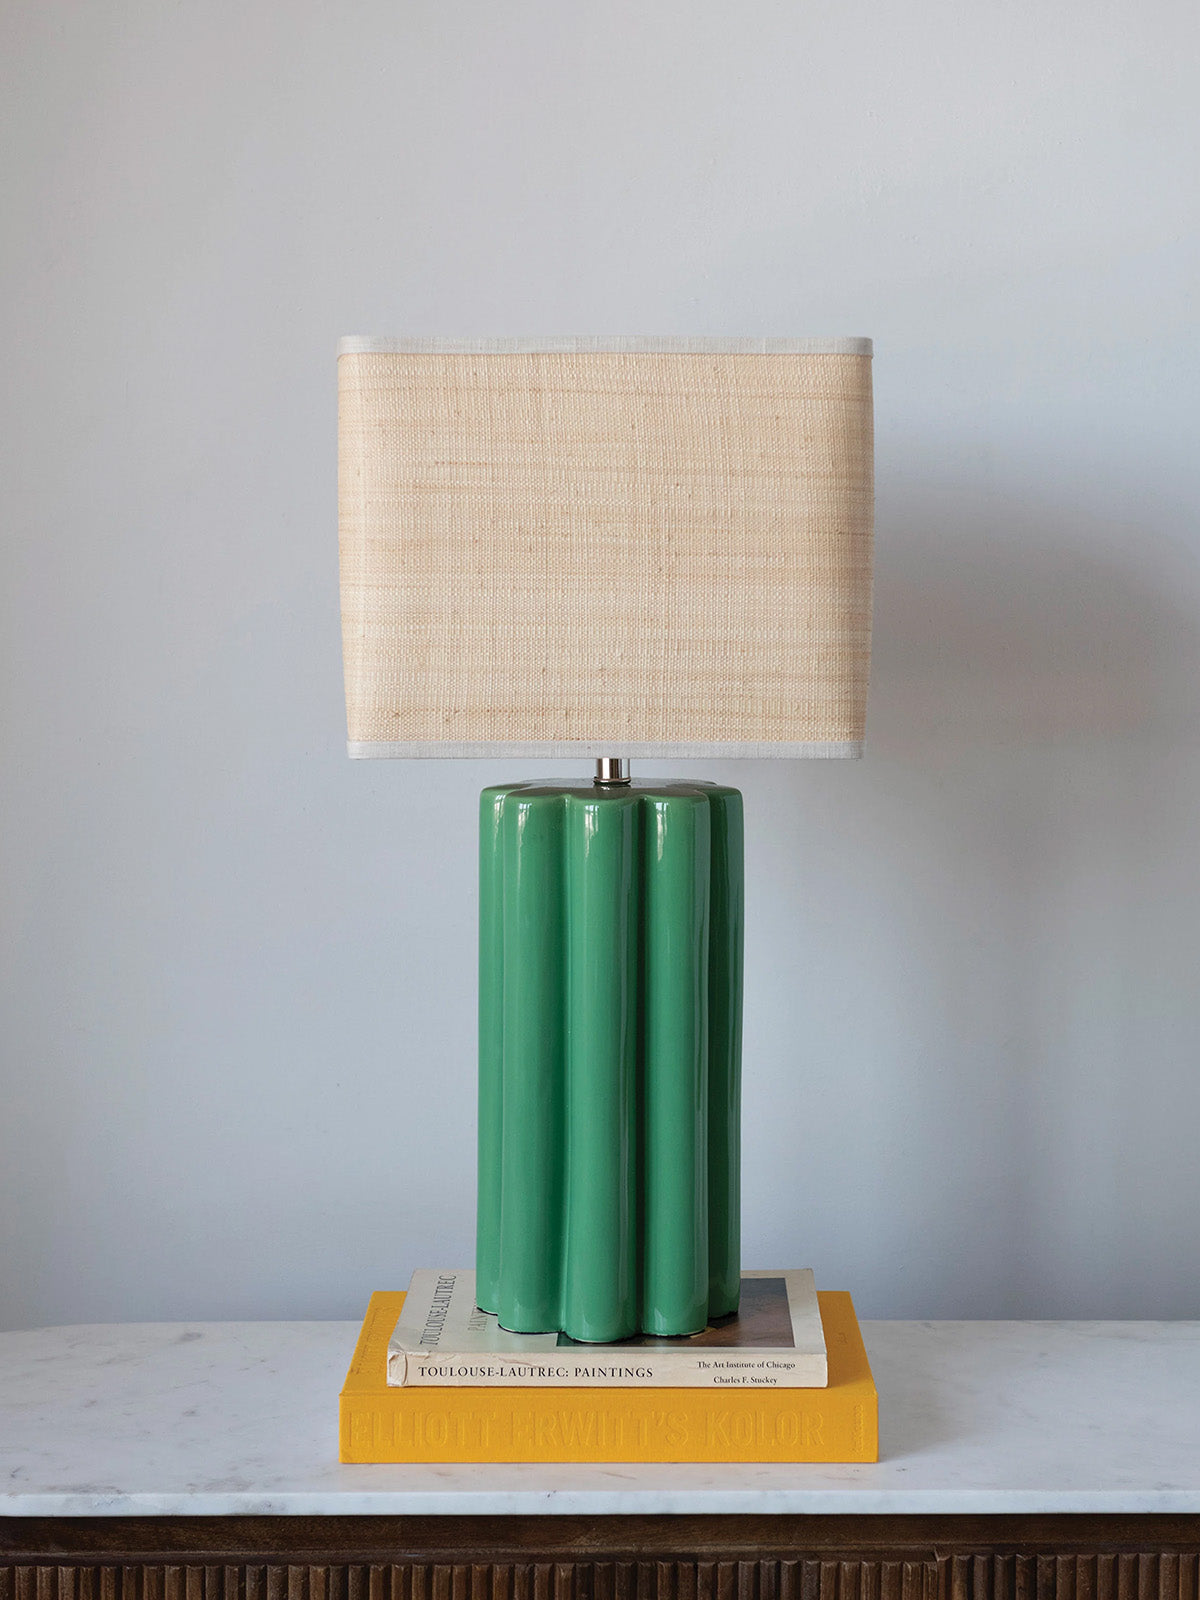 Green Fluted Table Lamp